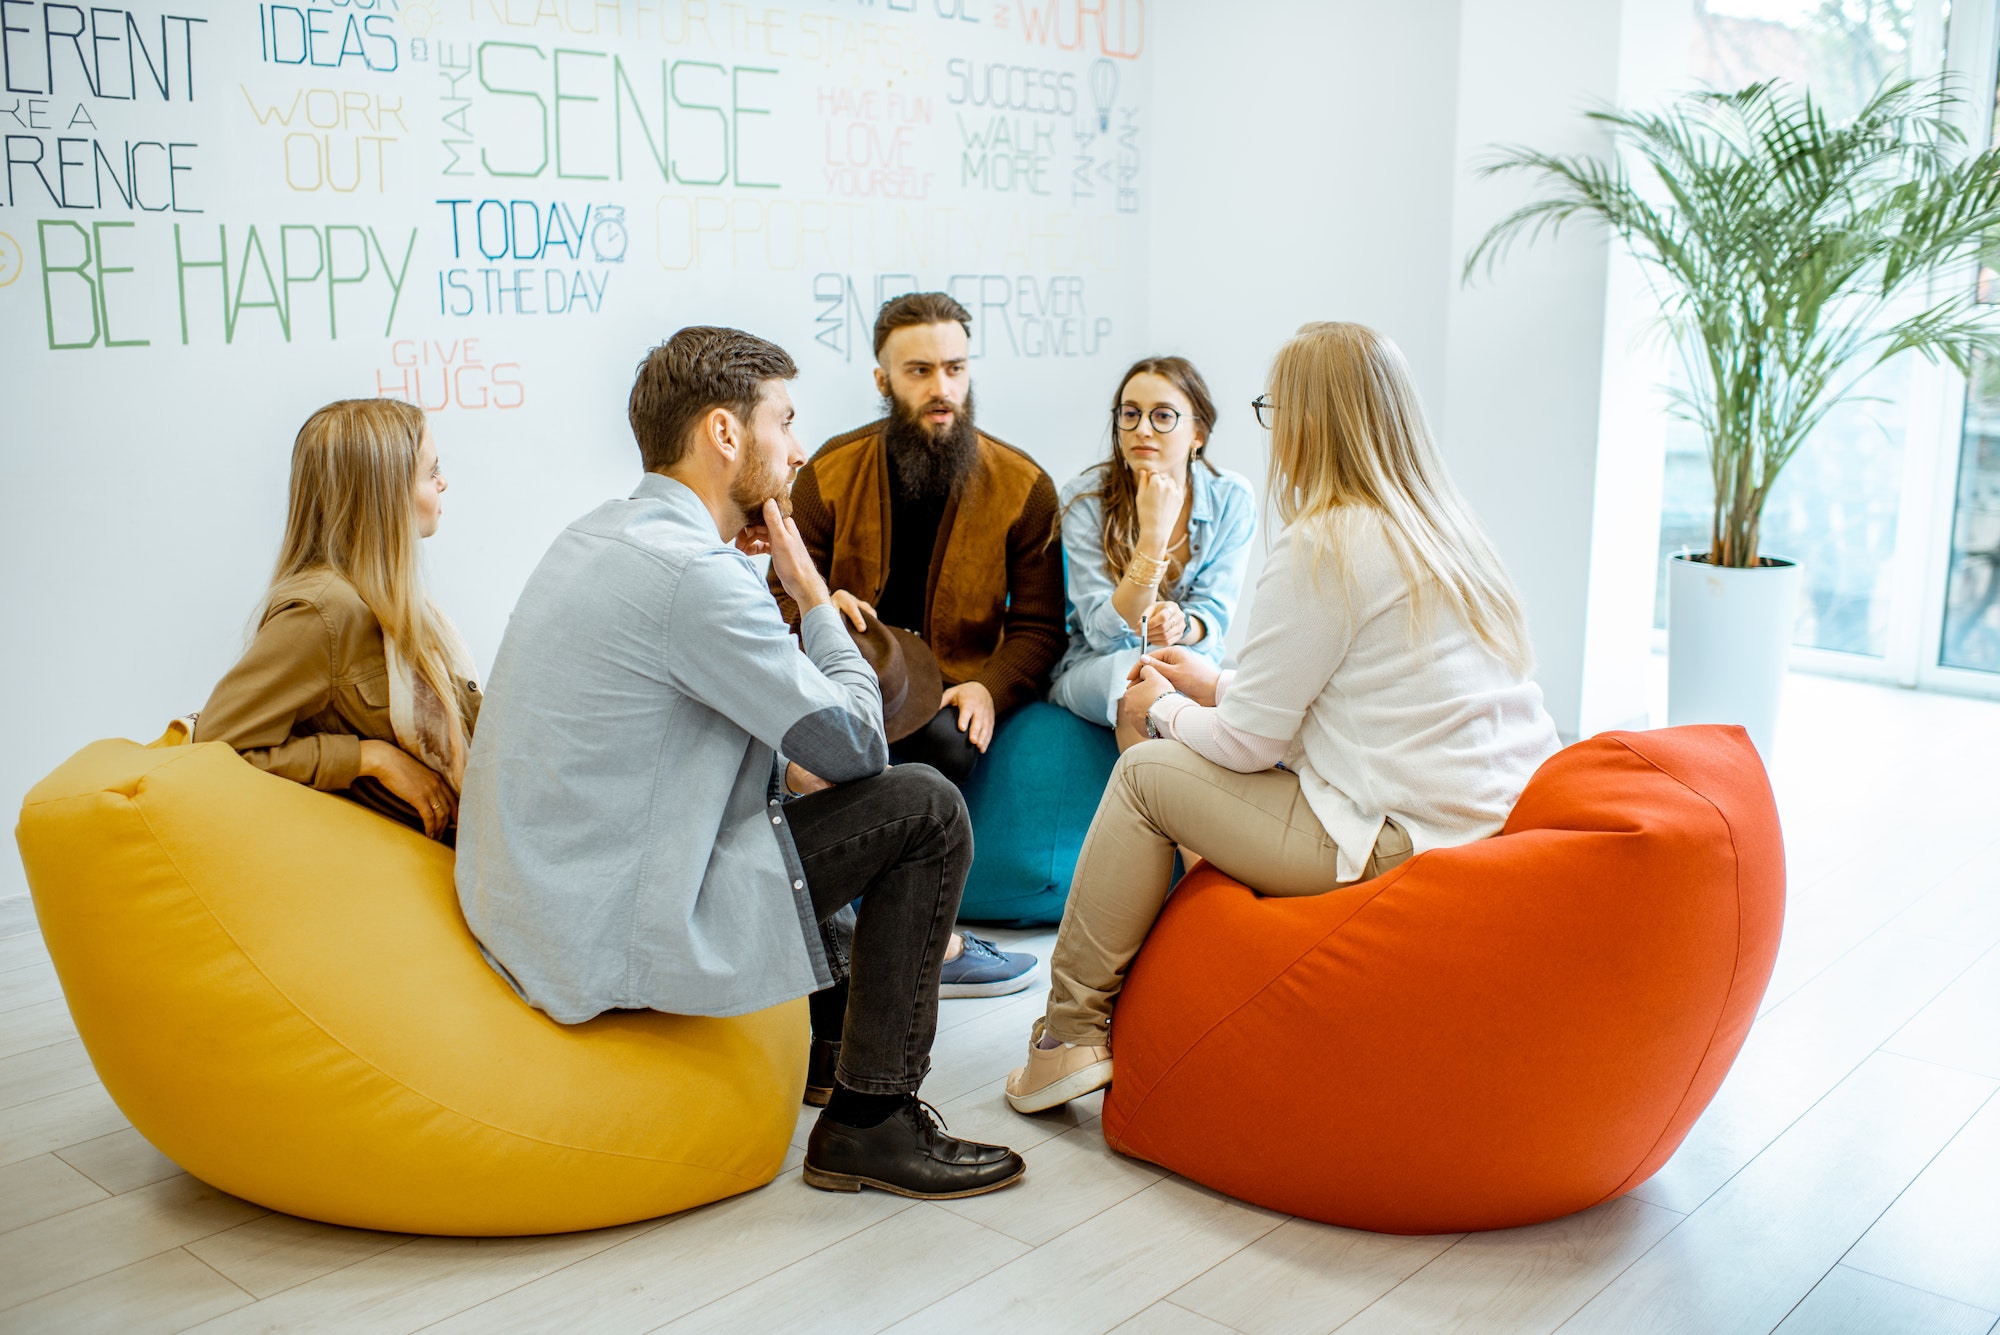 Group of people during the psychological therapy indoors